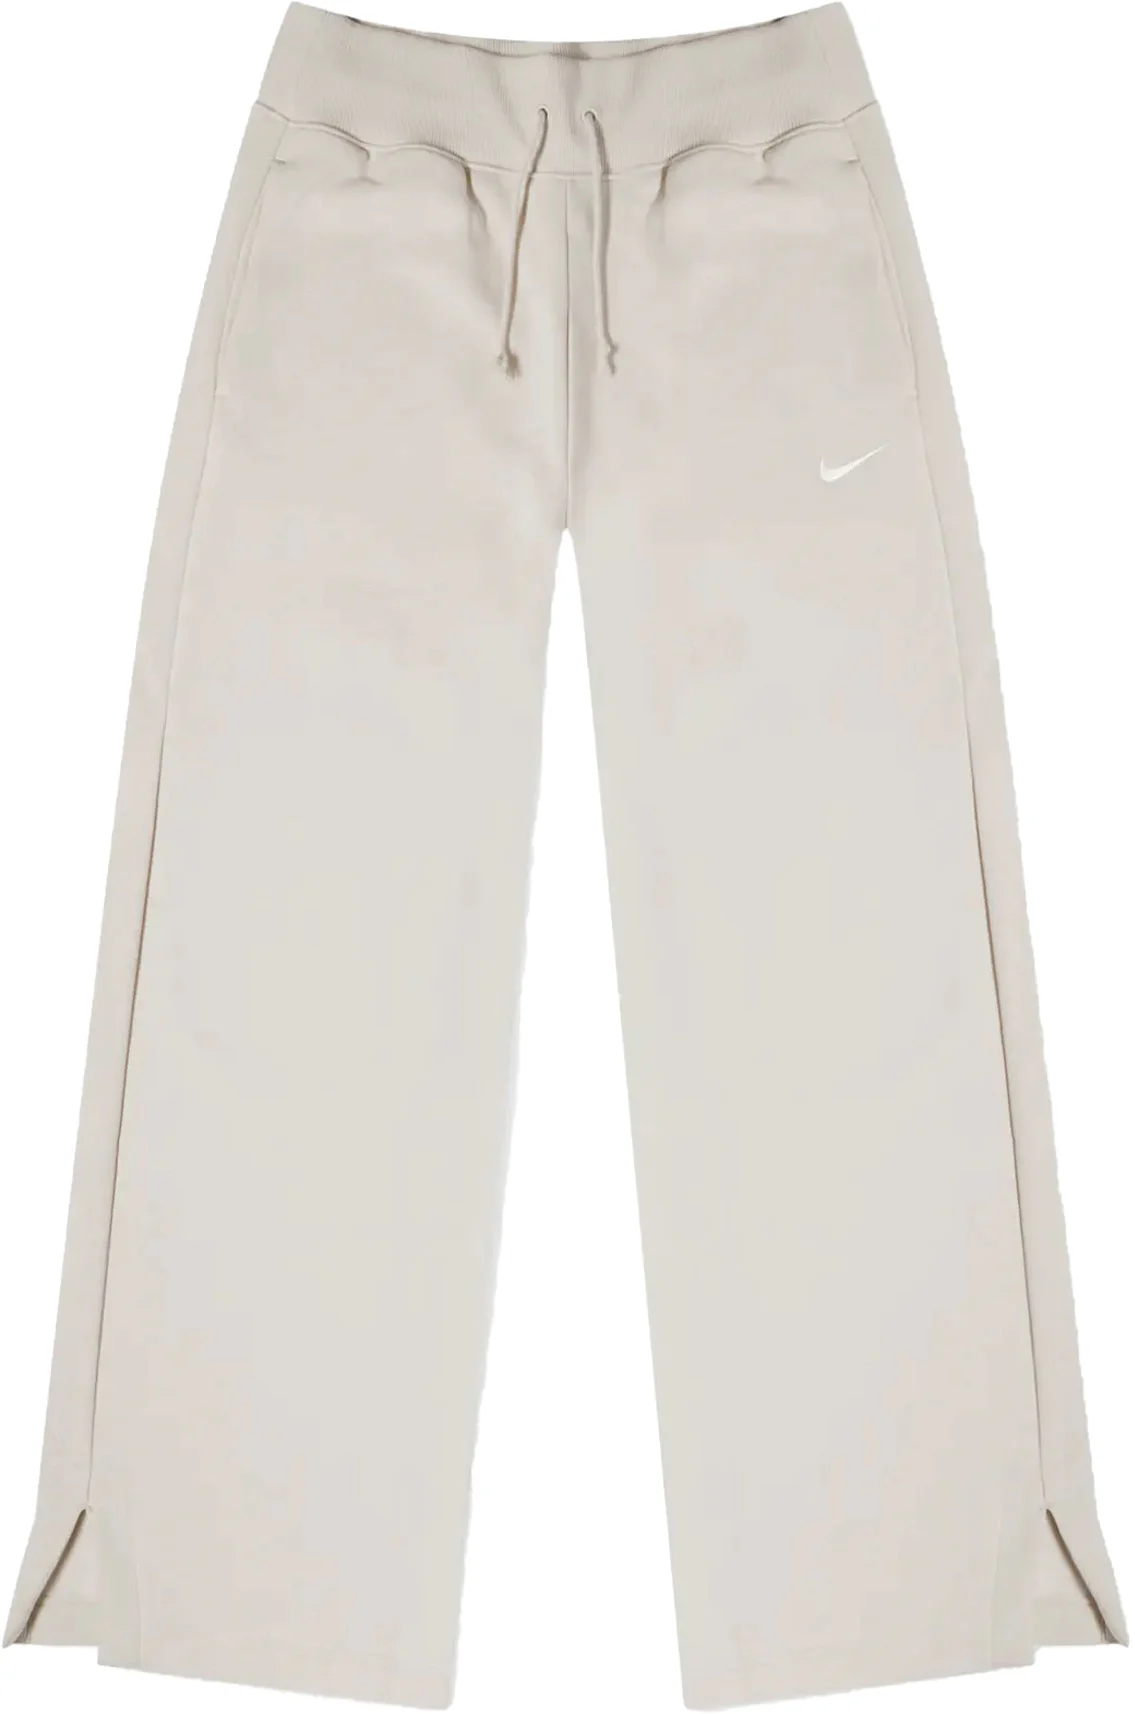 flare nike sweatpants - Buy flare nike sweatpants with free shipping on  AliExpress